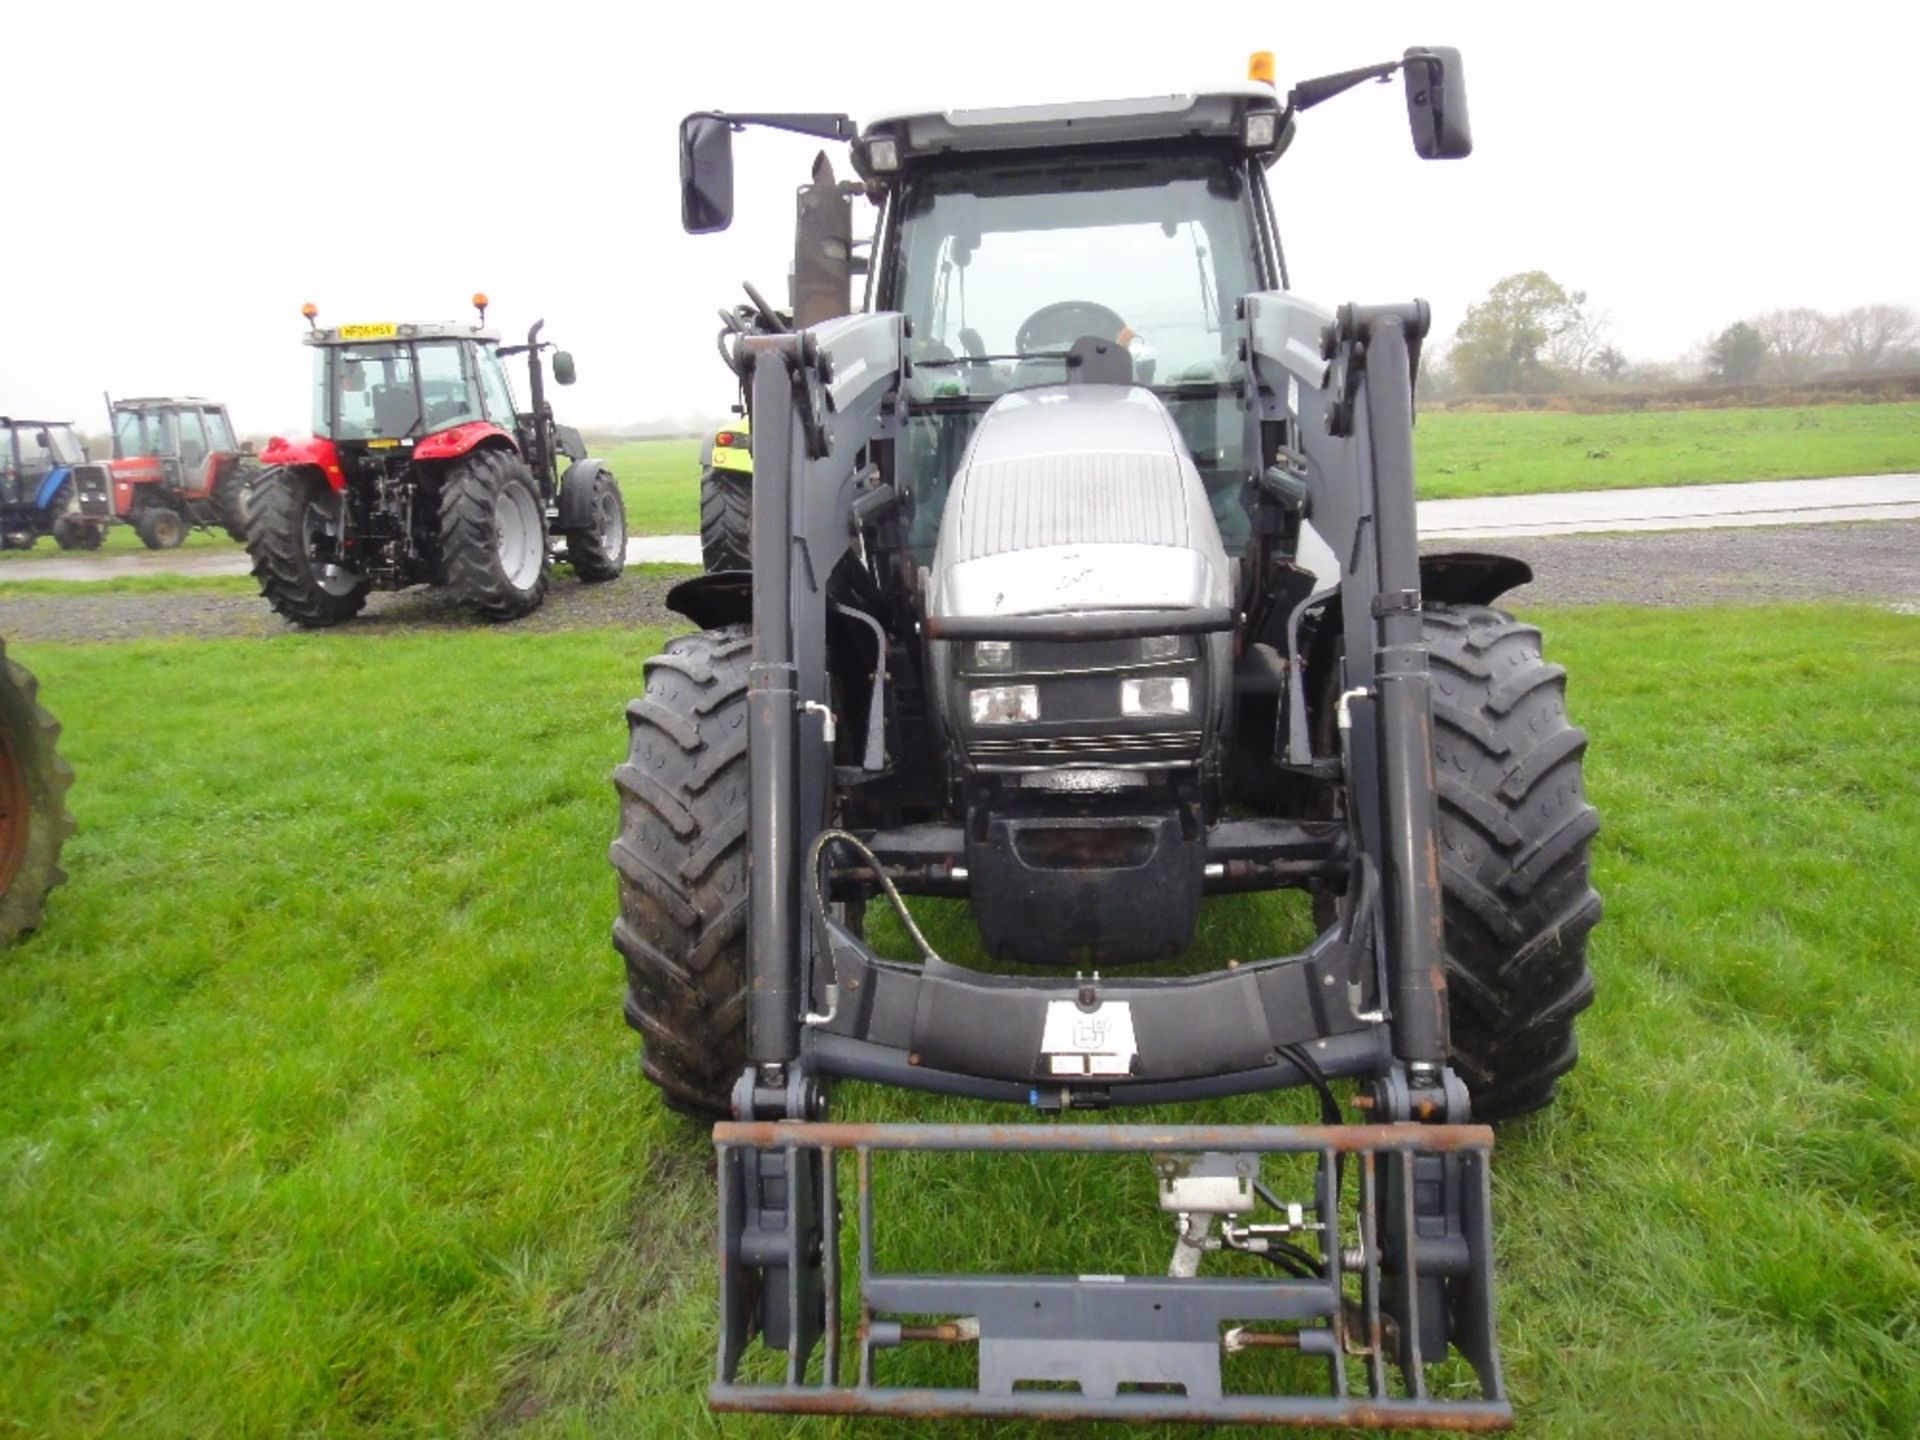 2007 Lamborghini R6120 4wd Tractor with Quickie Q45 Loader. V5 will be supplied - Image 2 of 7